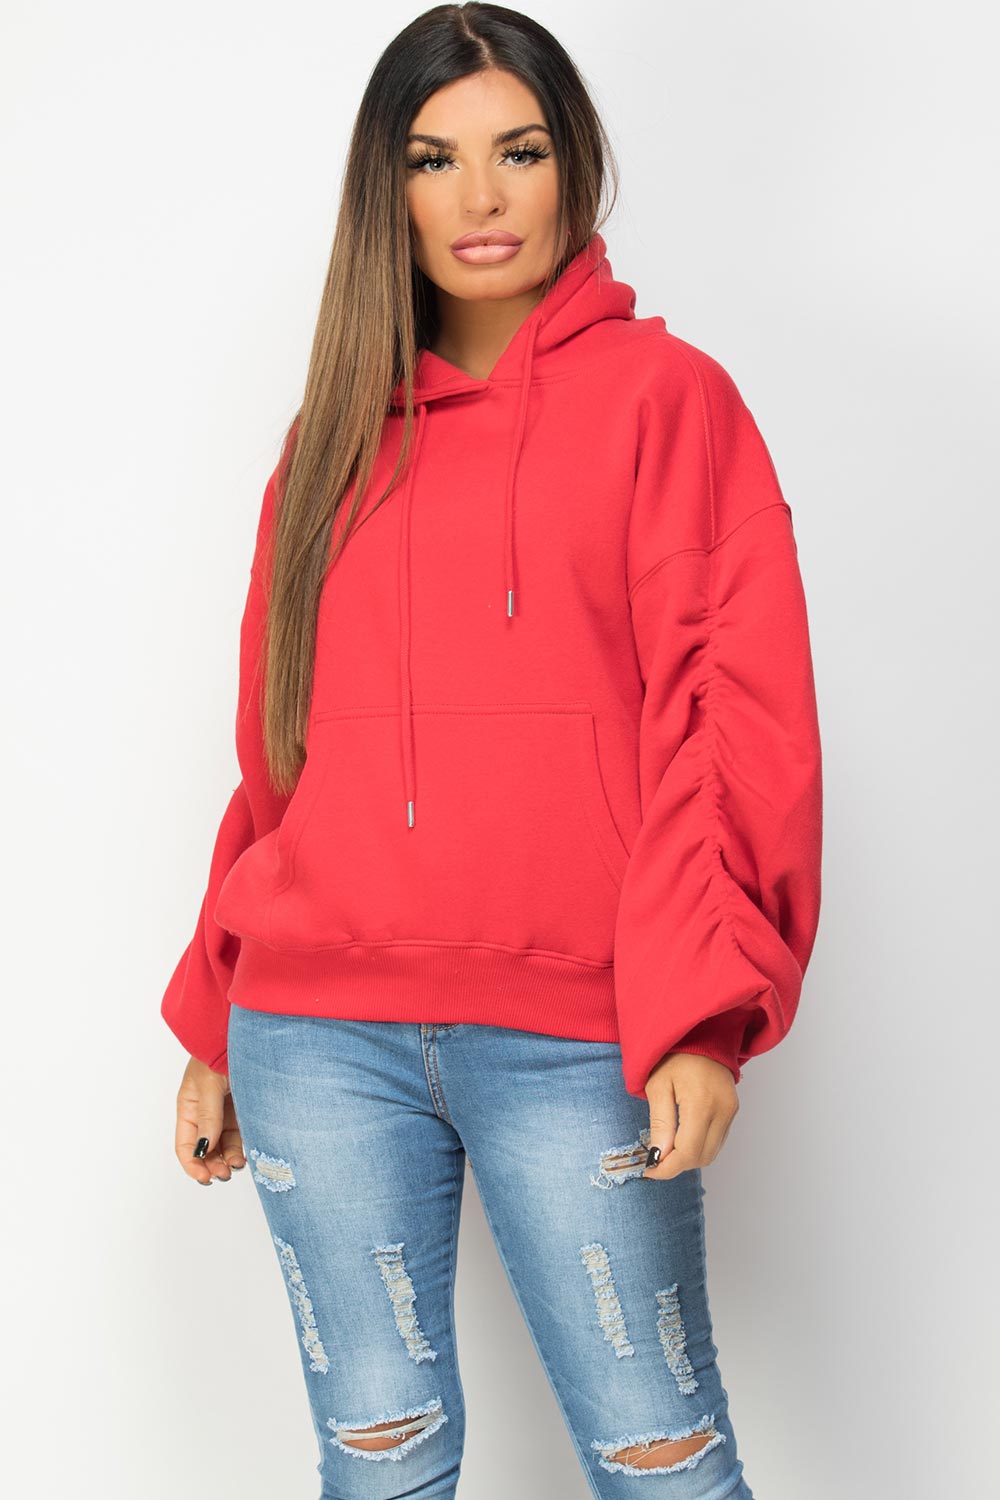 red hoodie with ruched sleeves 